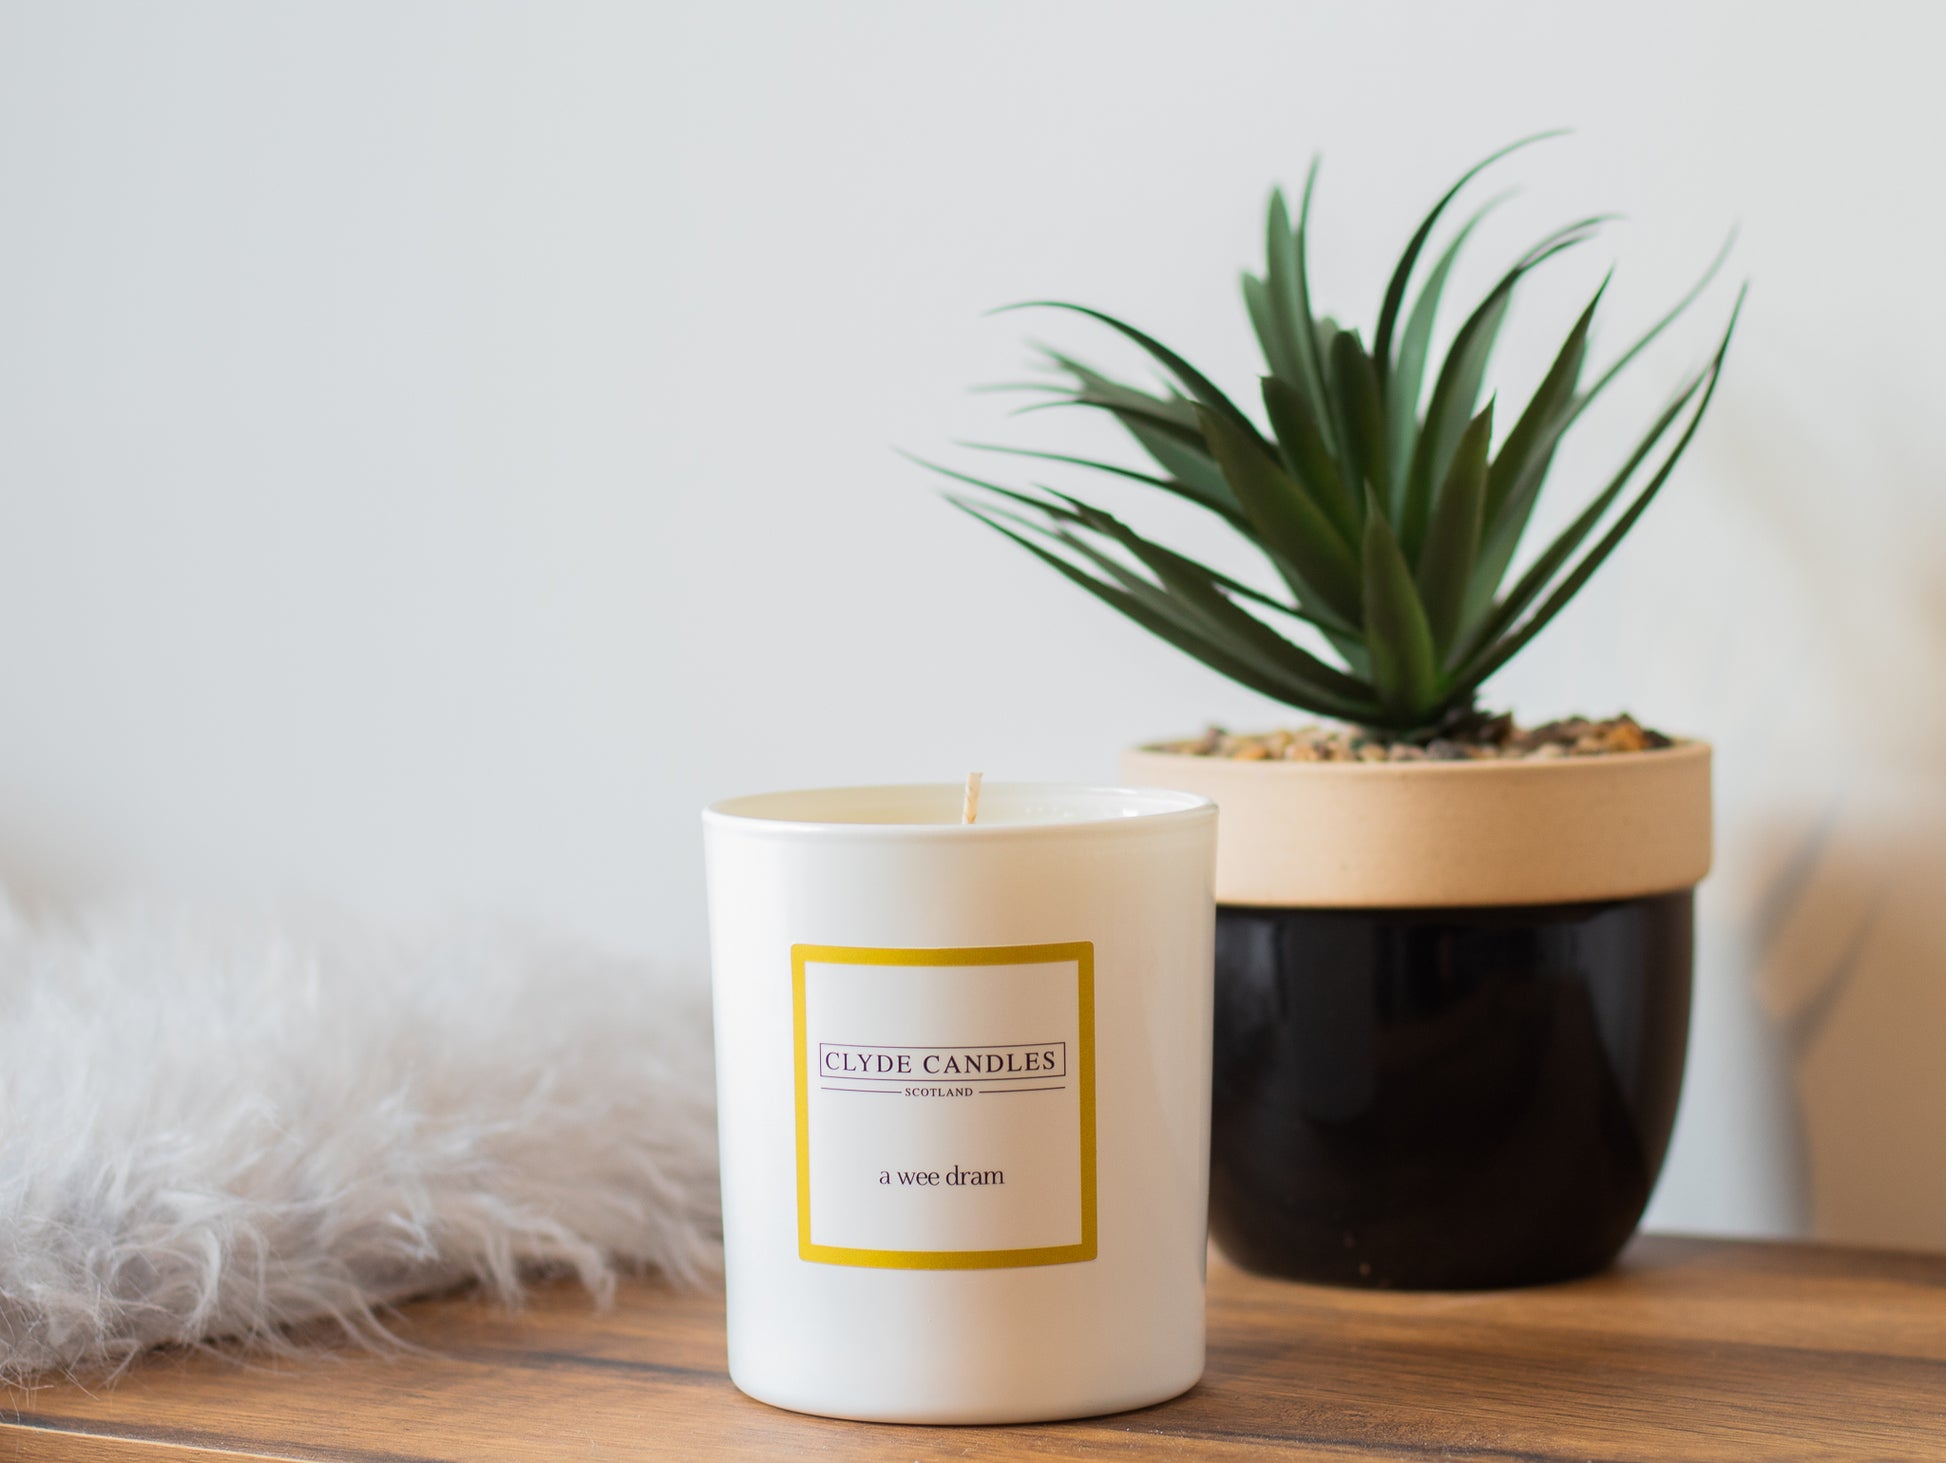 A Wee Dram Candle Natural Soy wax, Scottish Candles, Clyde Candles, whisky Candle, scottish luxury gifts